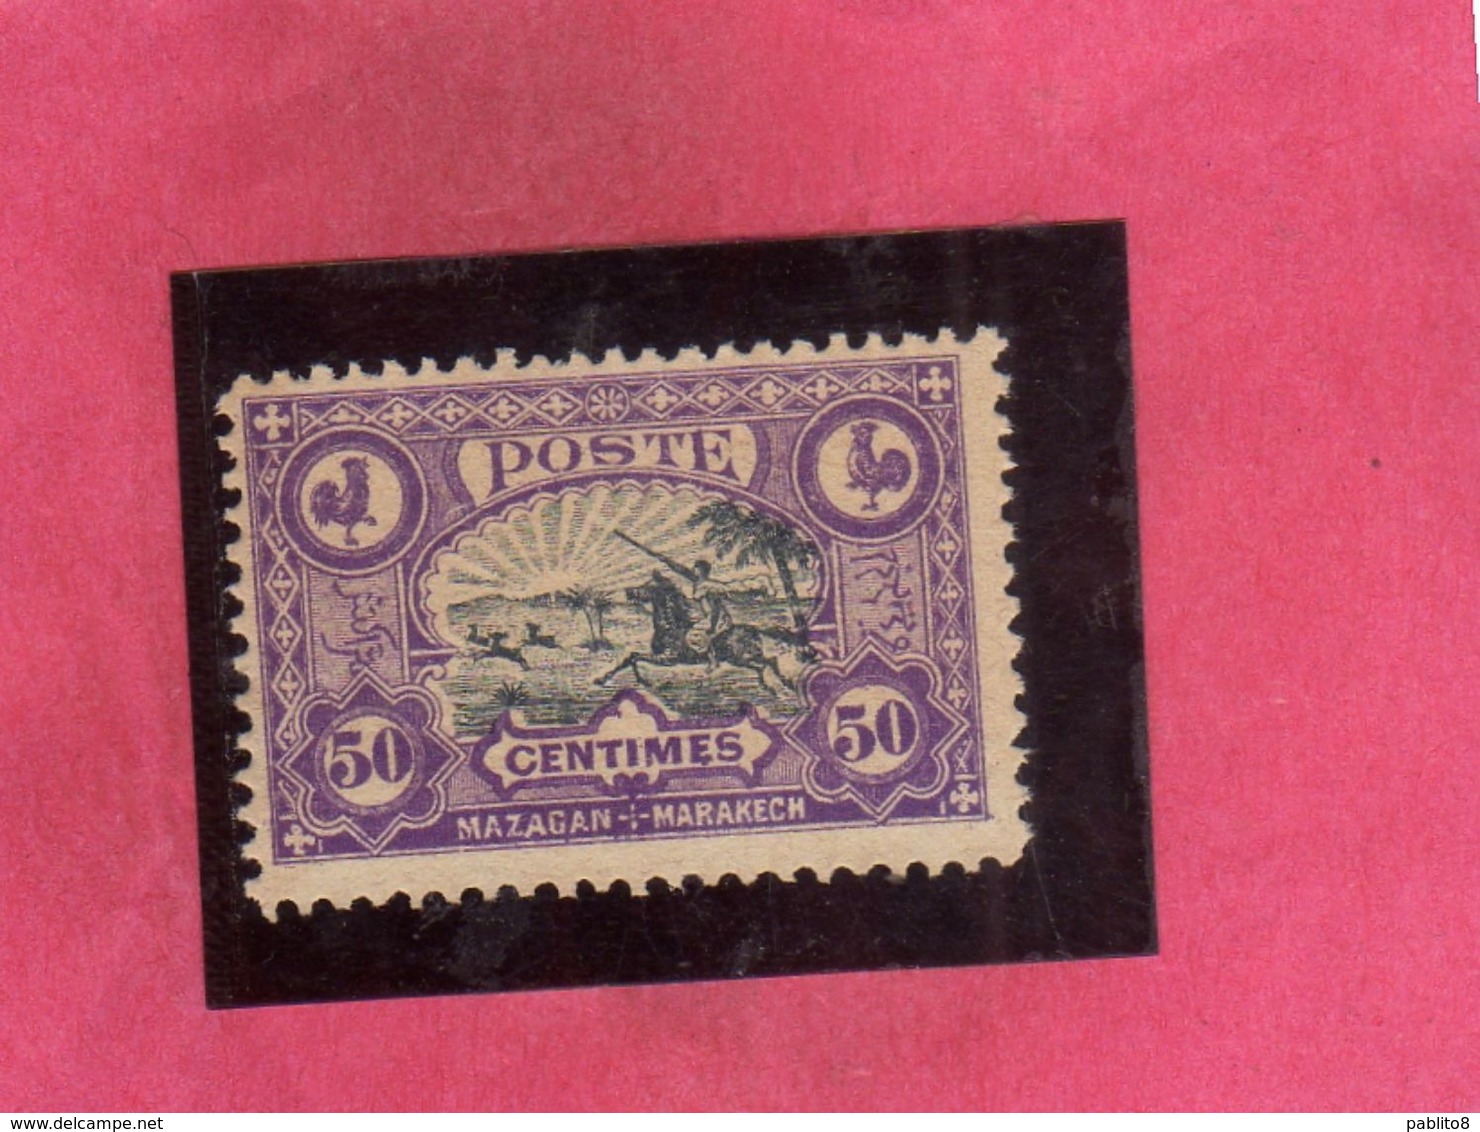 MAROC FRANCAISE MAROCCO FRANCESE FRENCH MOROCCO 1899 LOCAL POST MAZAGAN MARAKECH CENT. 50c MNH - Locals & Carriers